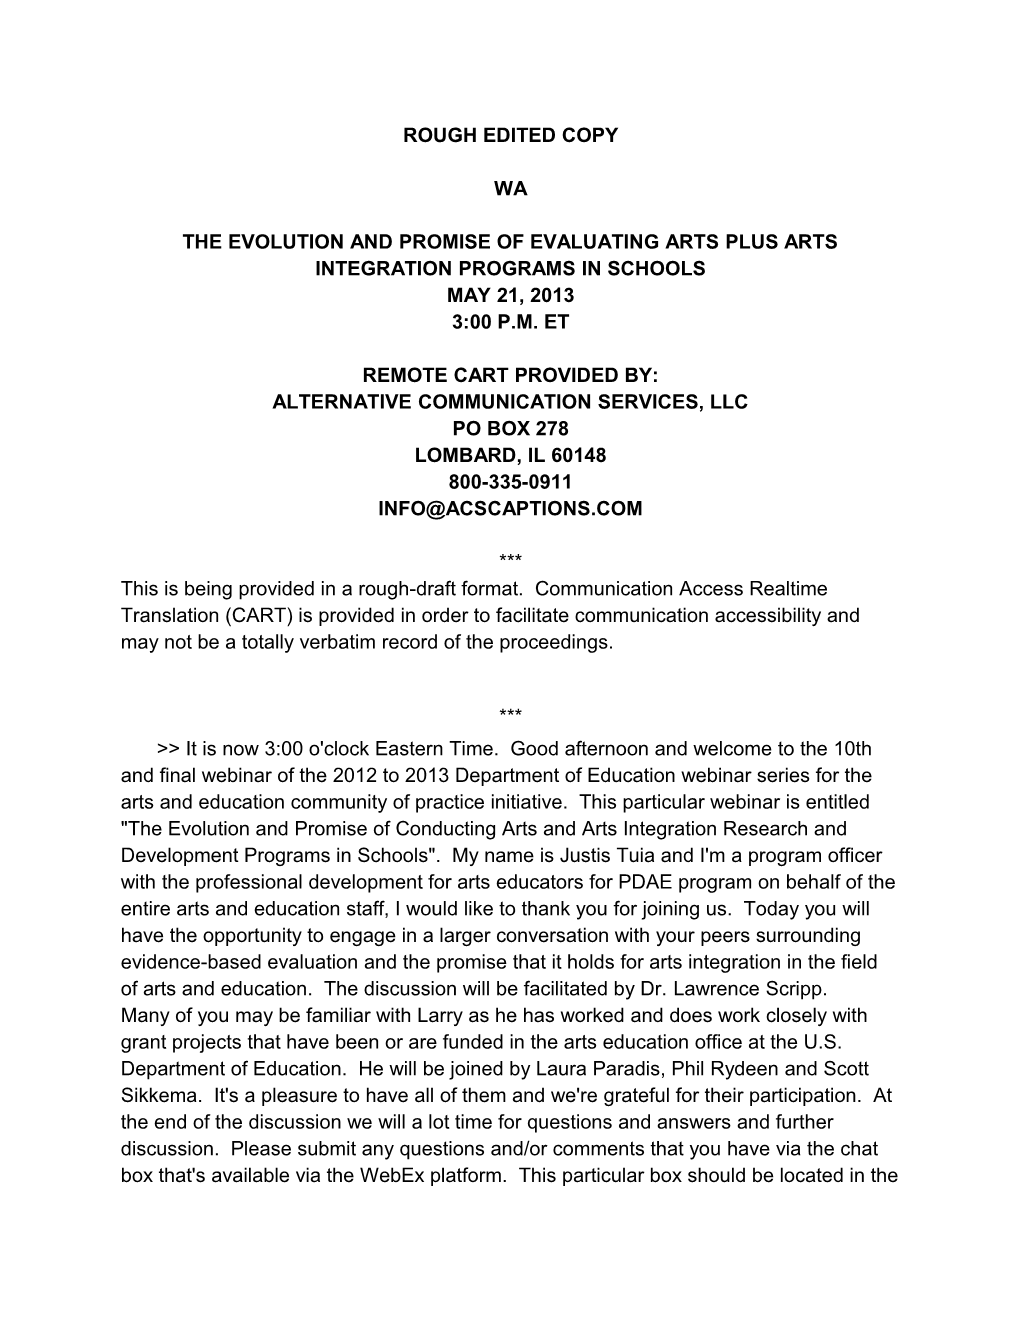 The Evolution and Promise of Evaluating Arts Plus Arts Integration Programs in Schools